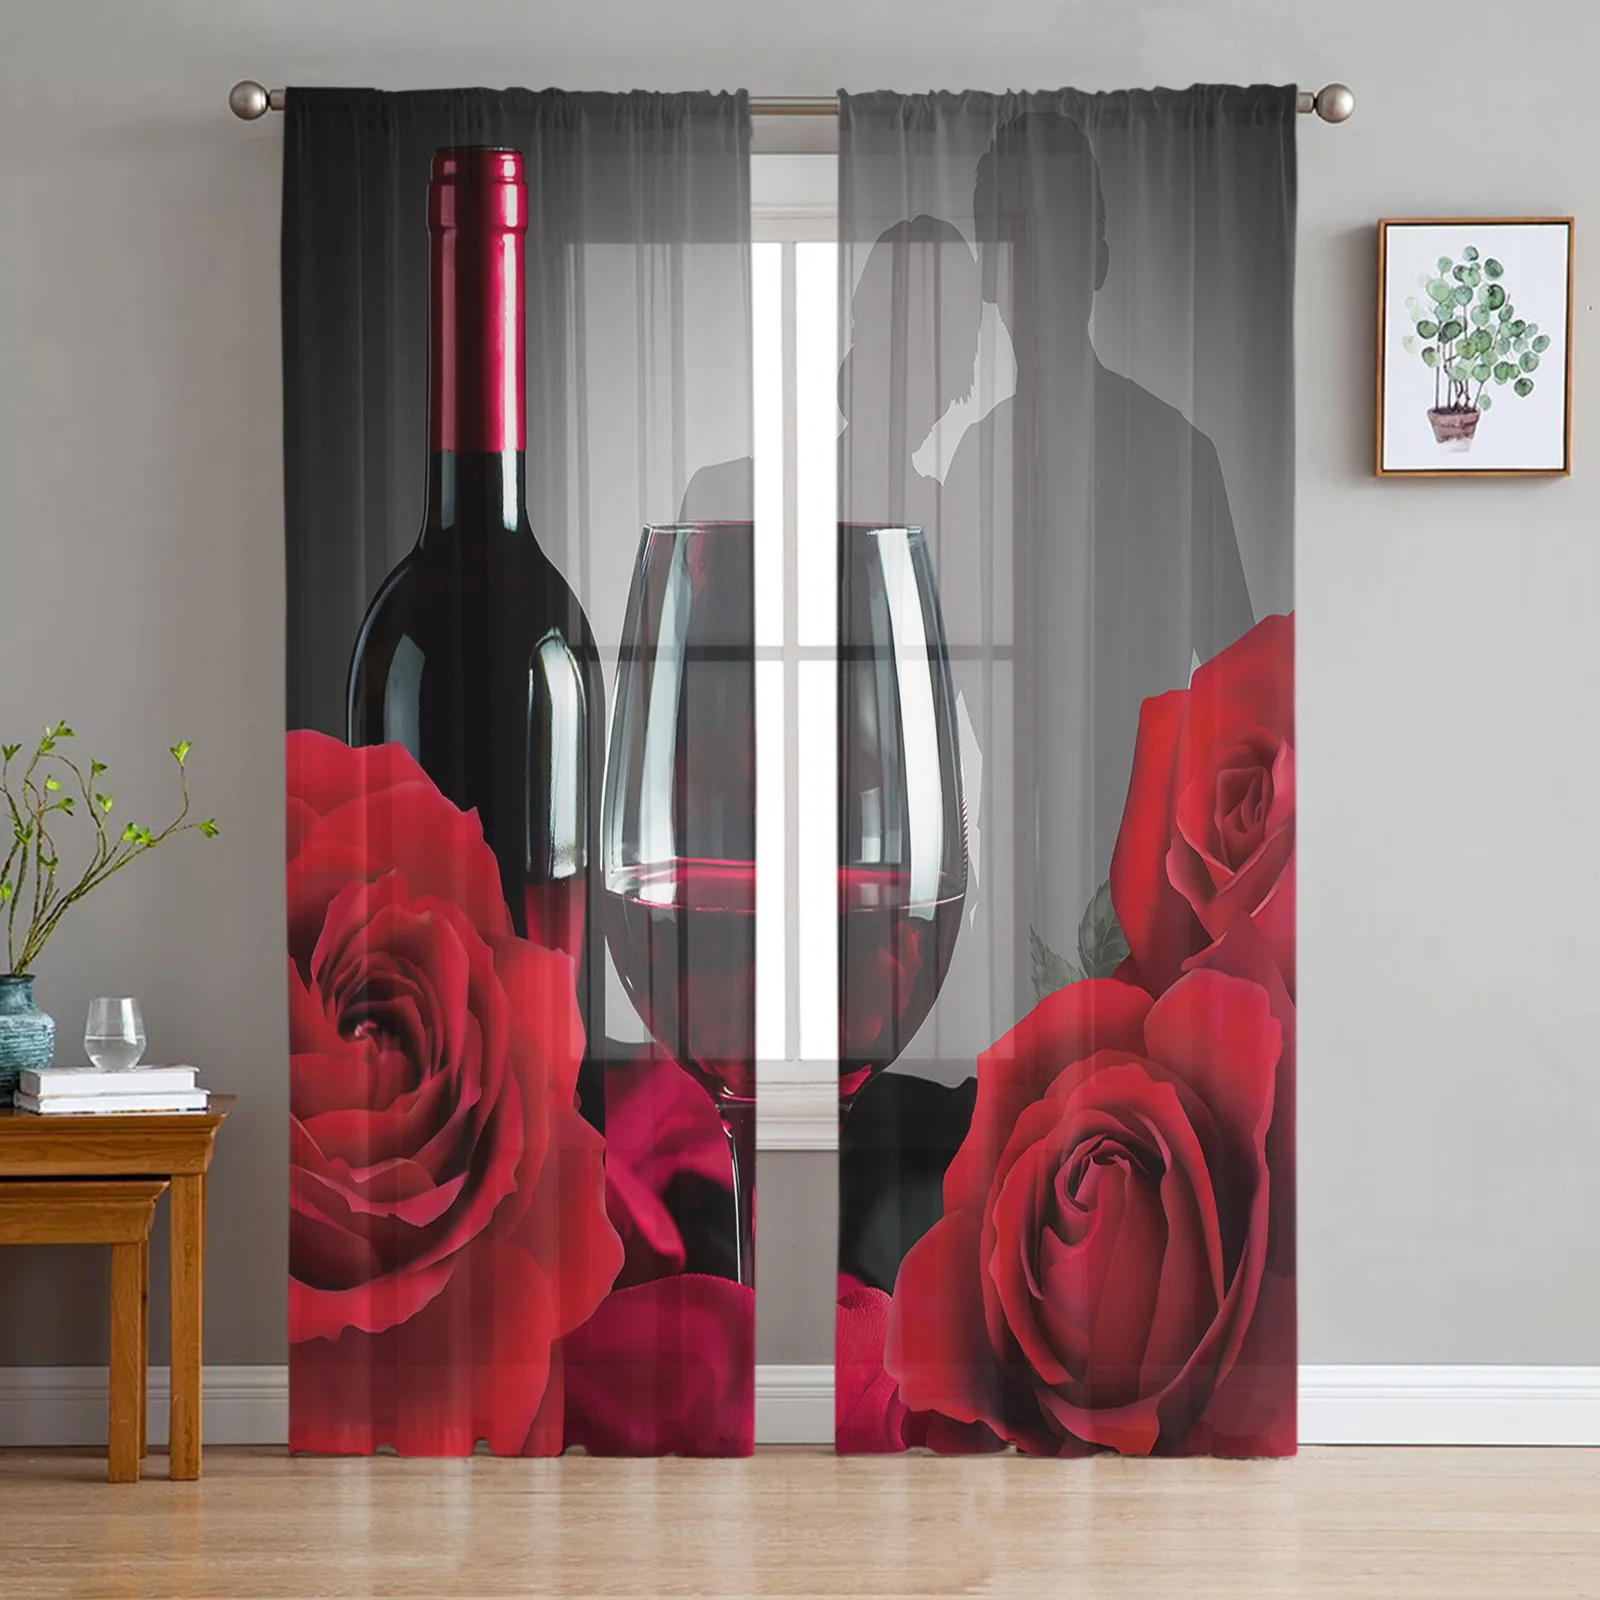 

Rose Flower Wine Red Black Tulle Voile Curtains For Bedroom Window Curtain For Living Room Sheer Curtains Blinds Organza Drapes